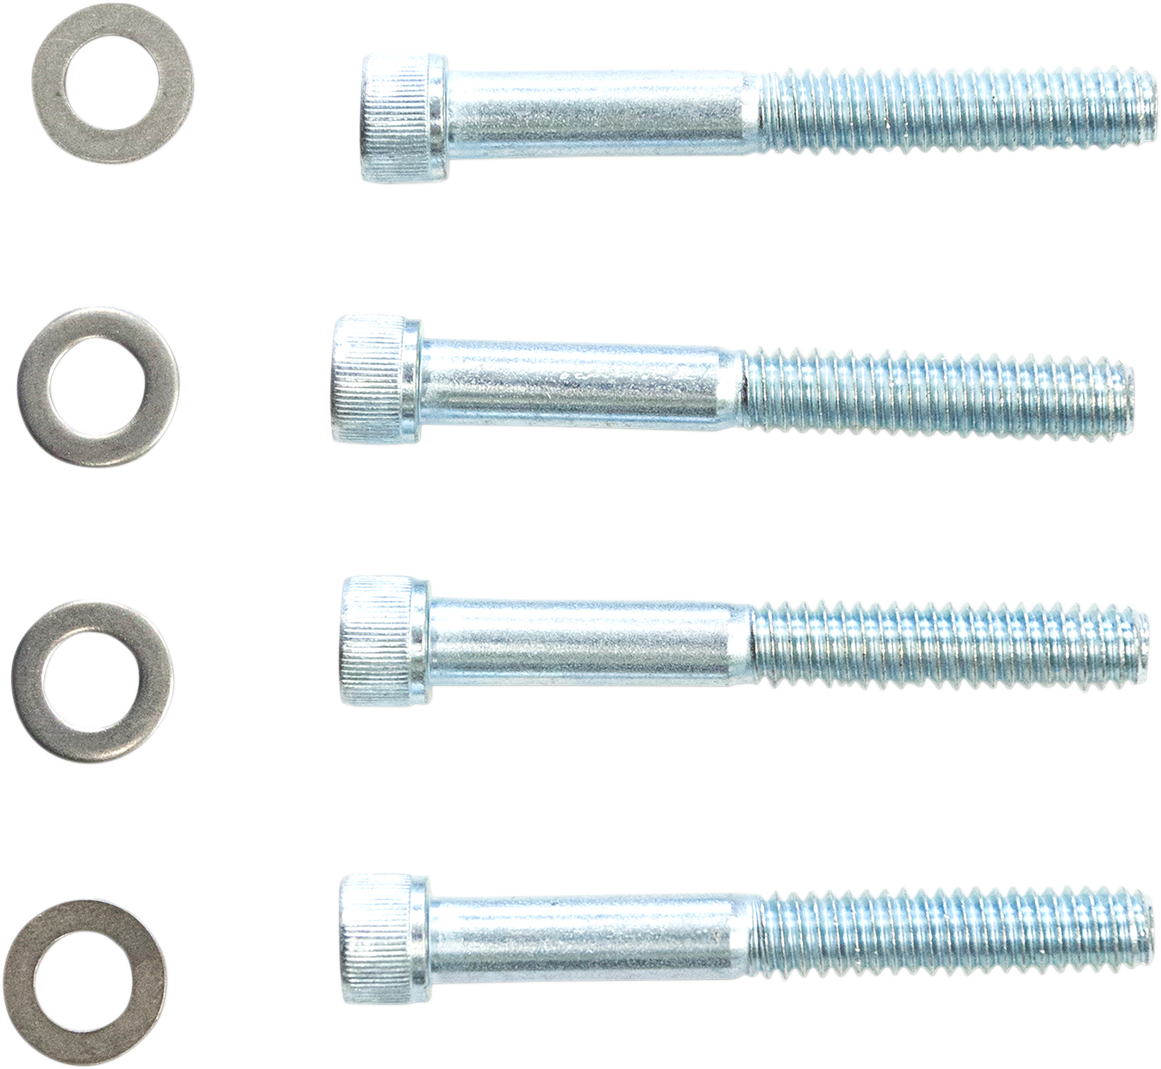 S&S Replacement Twin Cam Oil Pump Screw Kit 1999-2020 Harley Dyna Touring Models